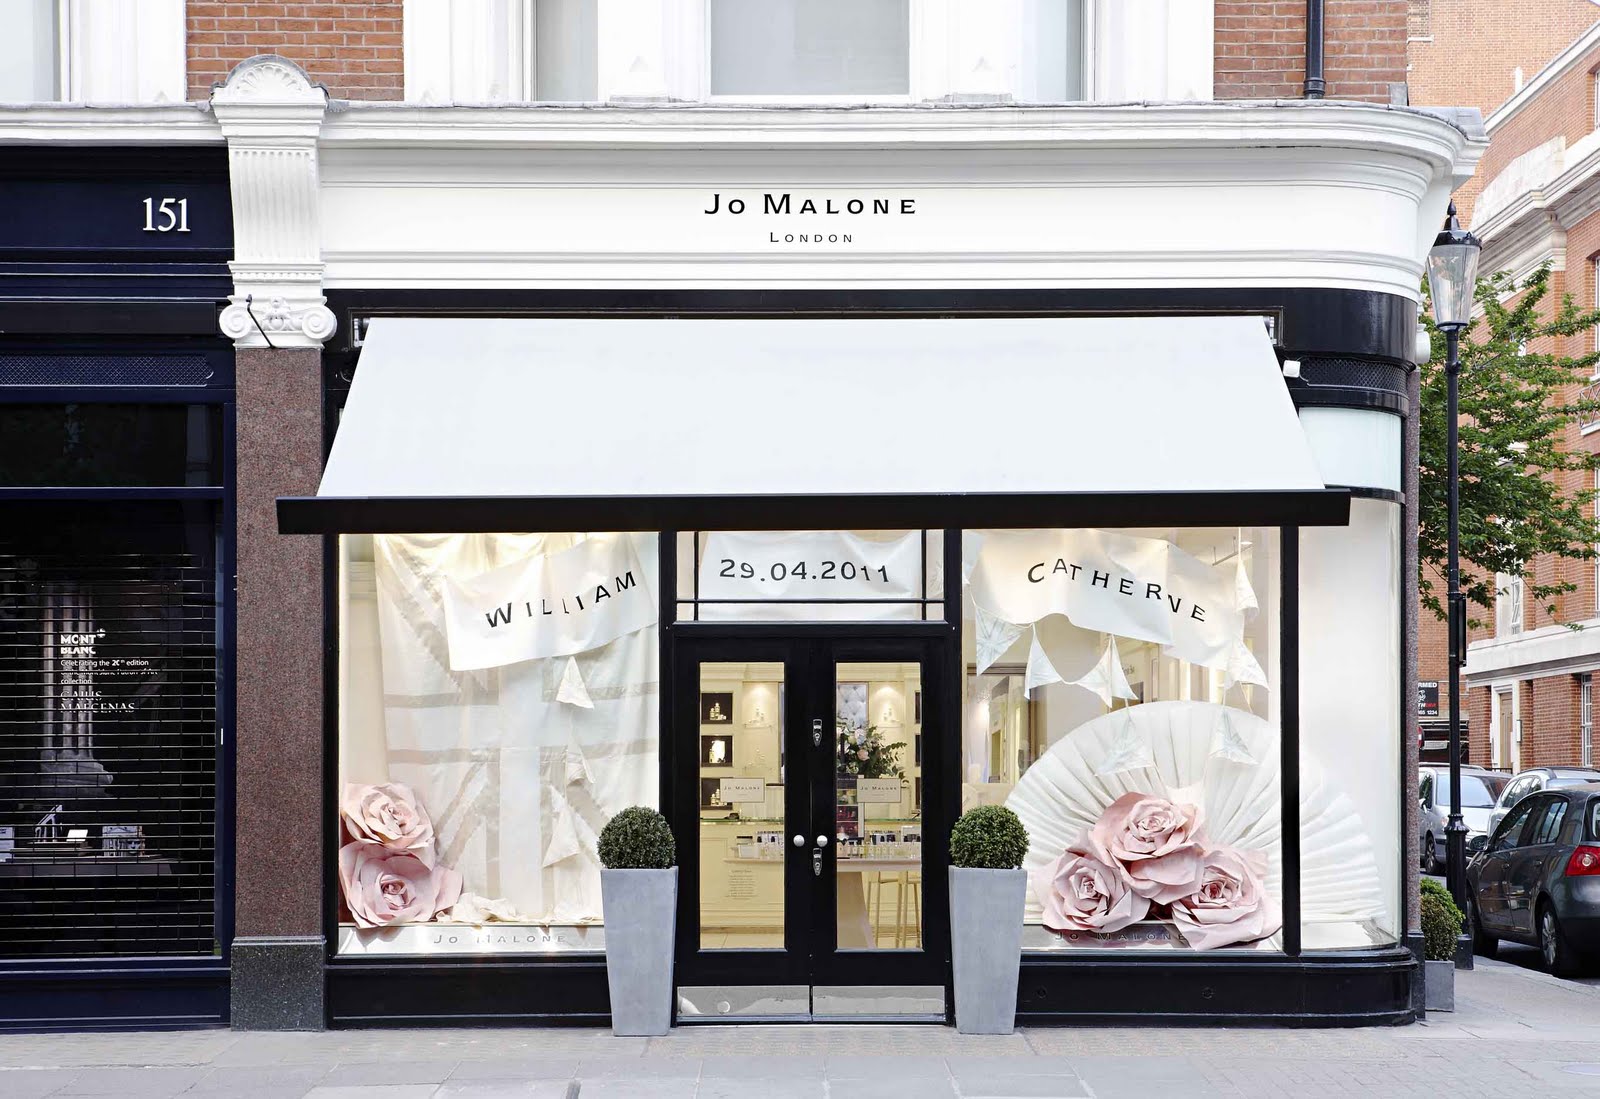 Jo Malone Celebrate's the Royal Wedding with a Tribute Window...